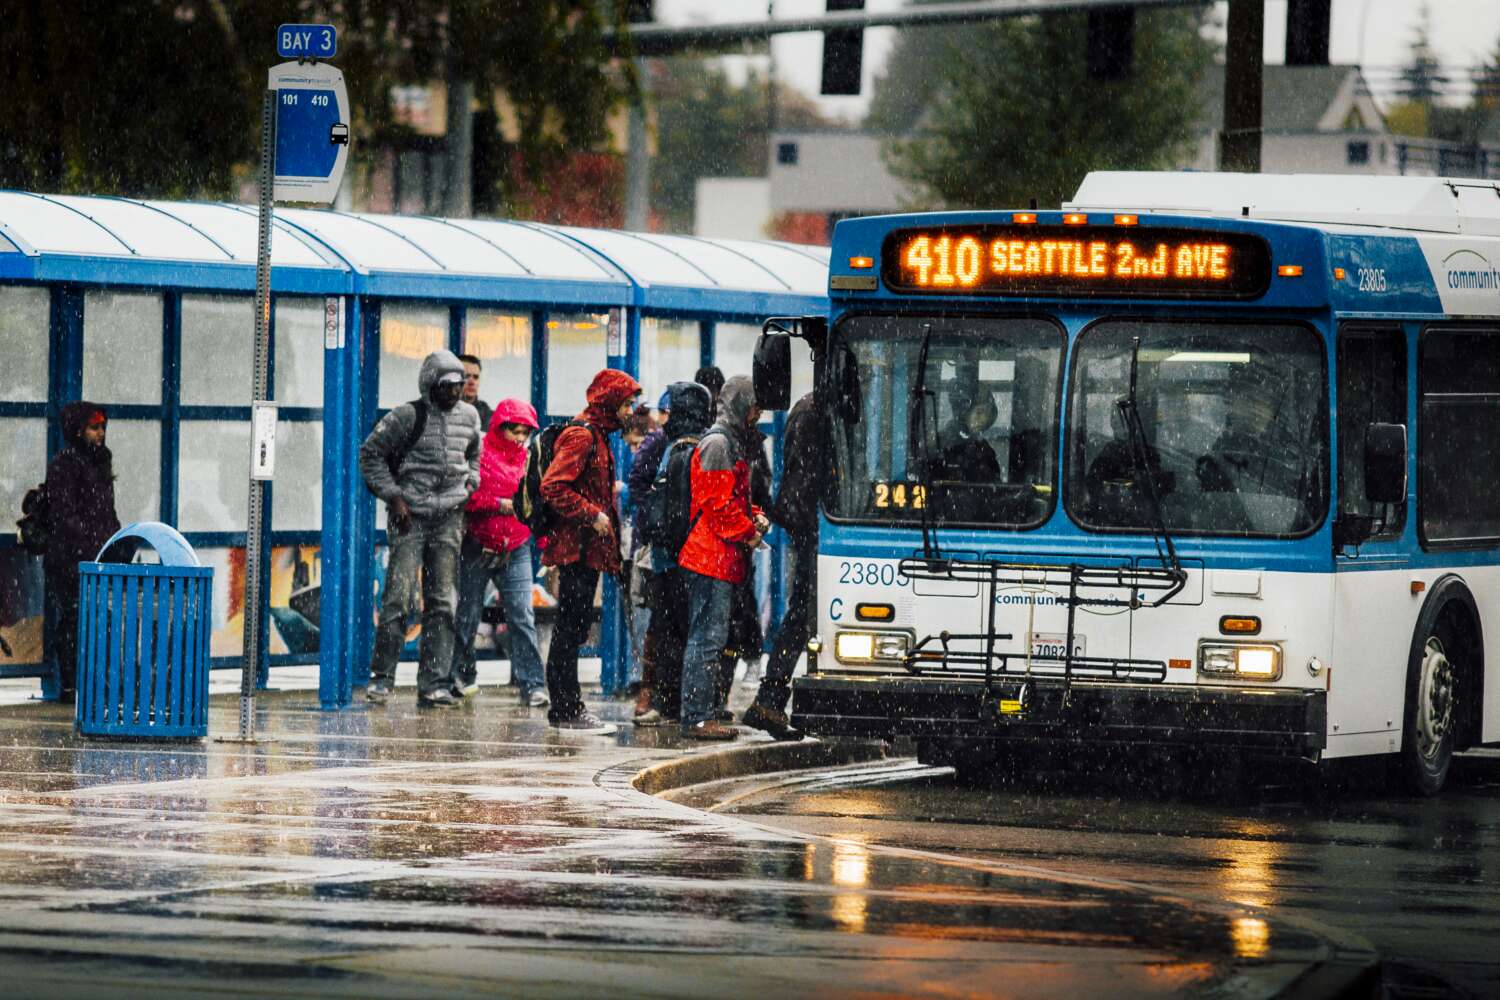 Image of Community Transit bus driving by Seattle's Pike Place Market.